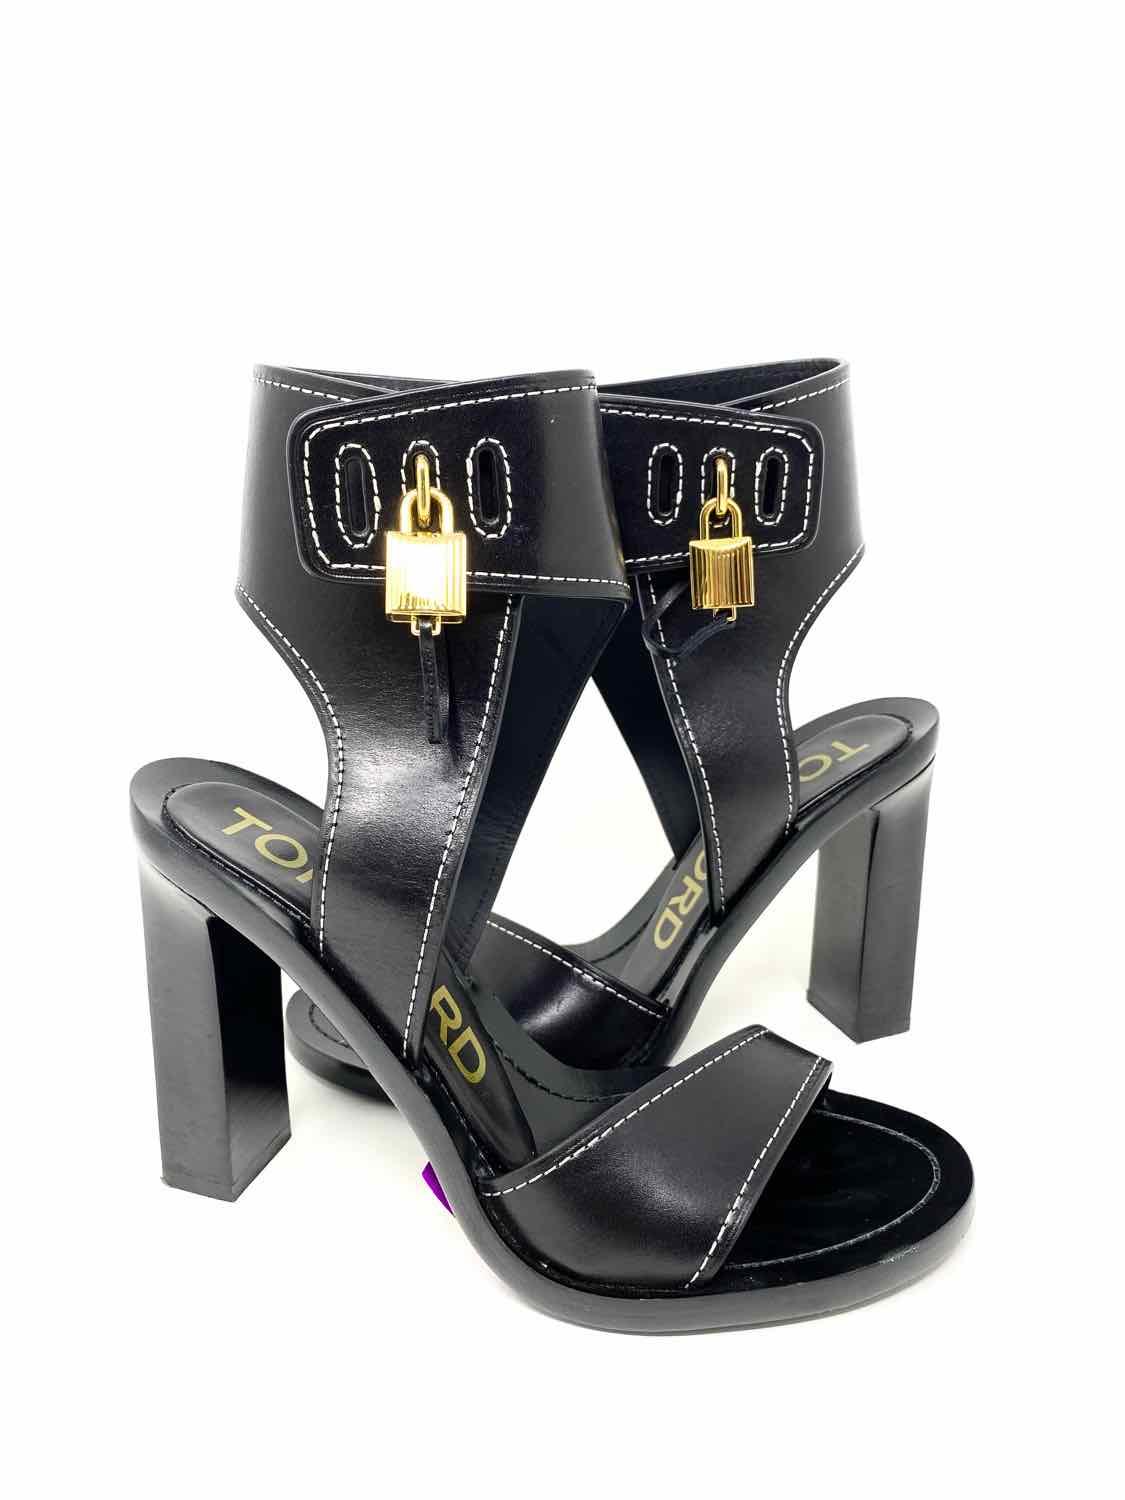 TOM FORD Women's Black/Gold Italy Size / Heels - Article Consignment